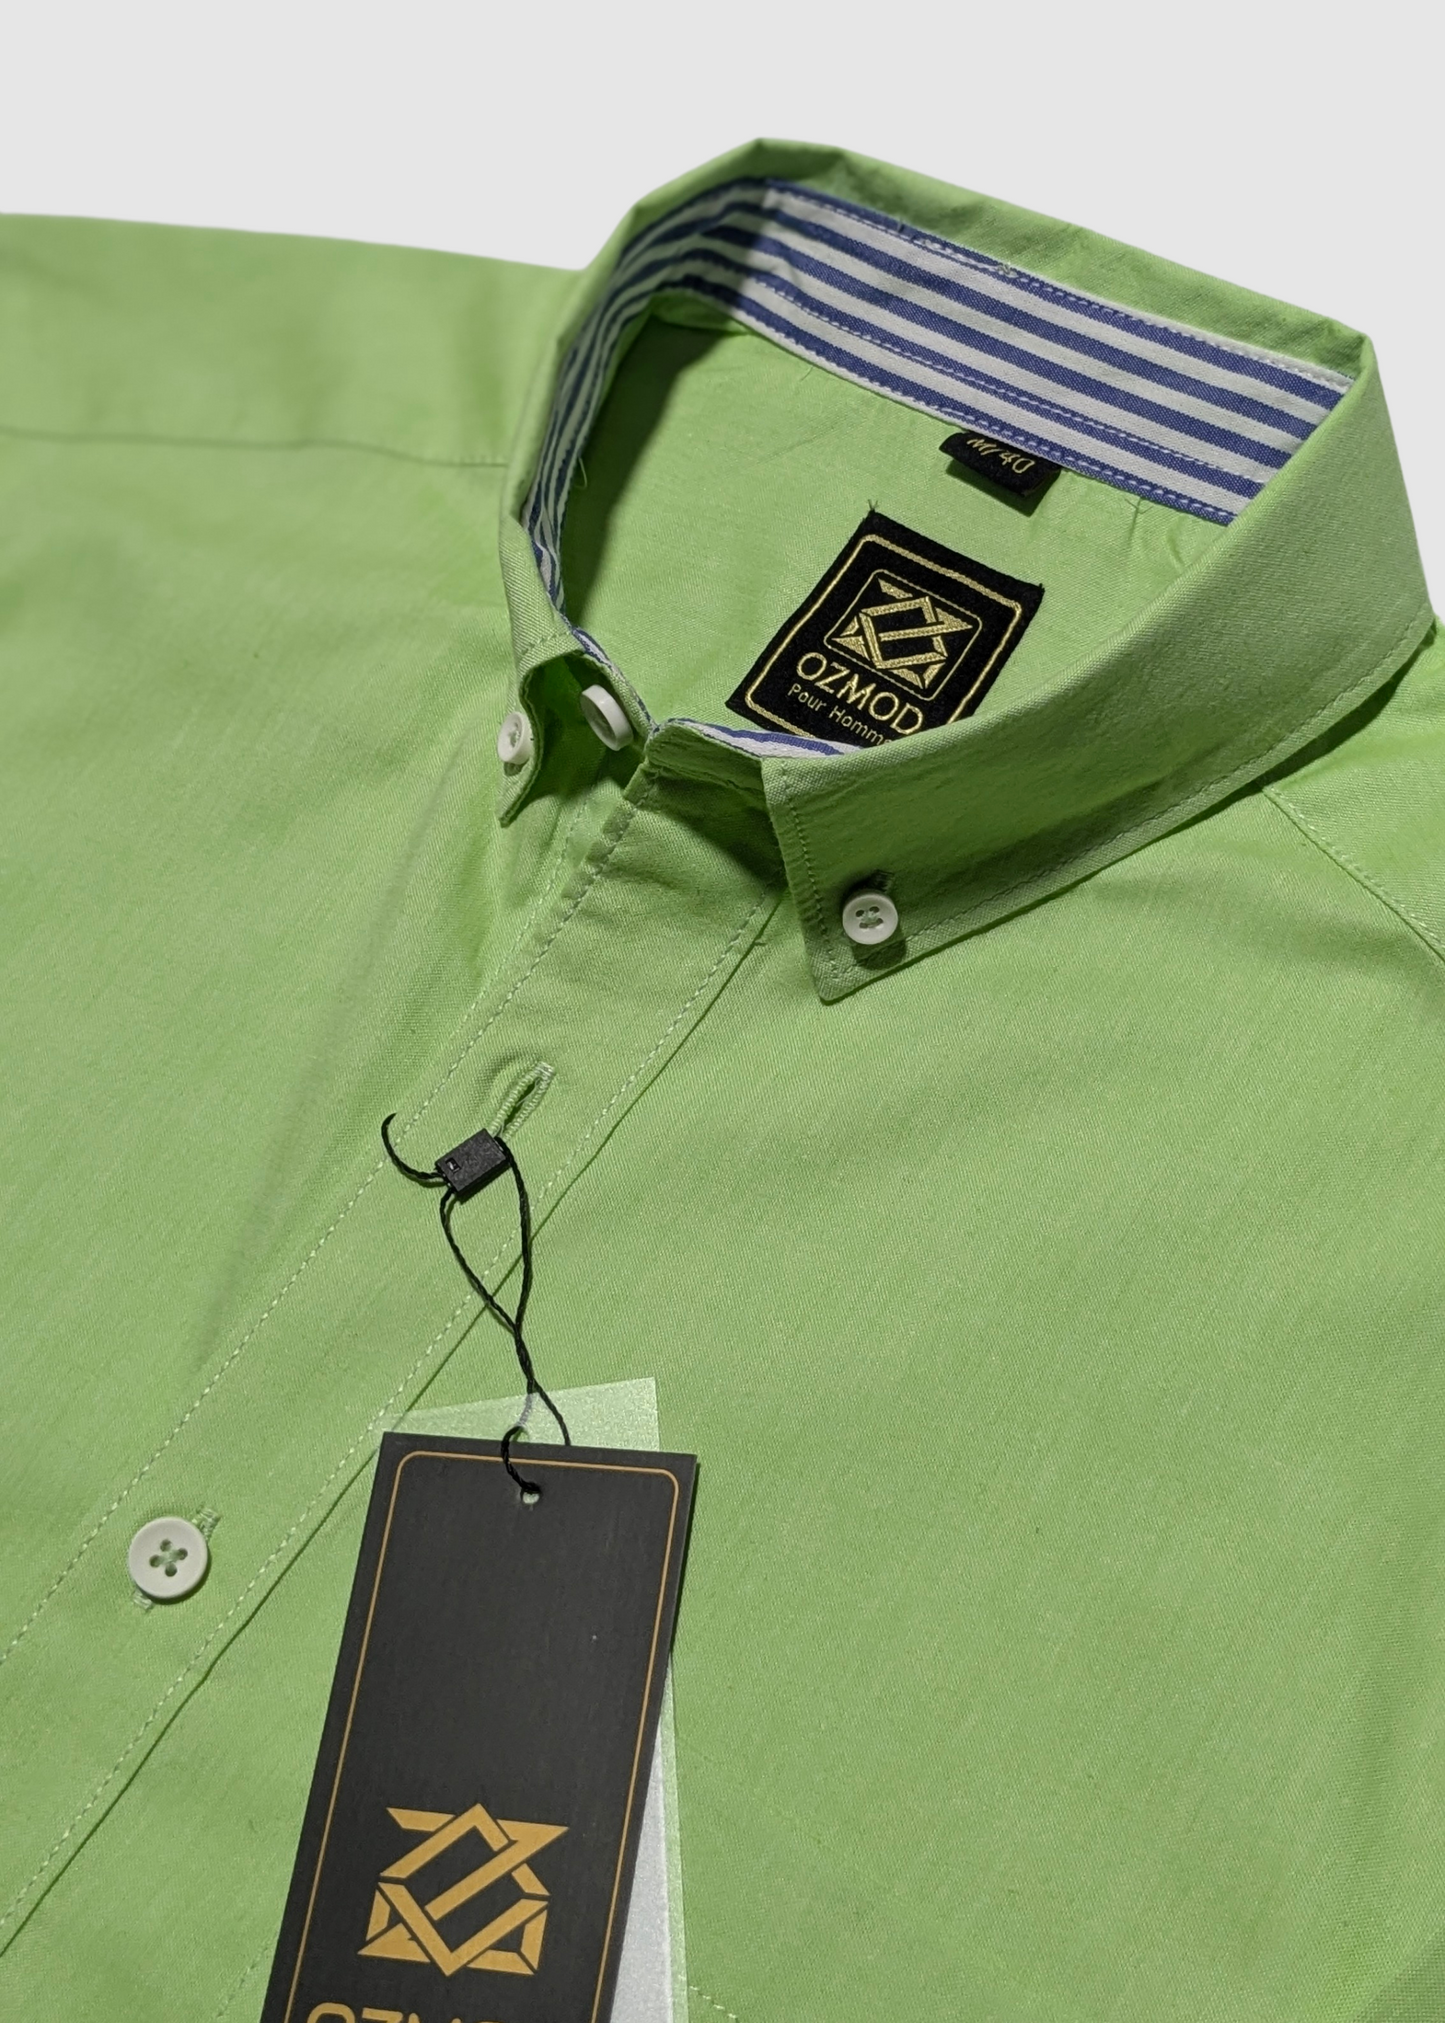 Lime Green Regular Fit Men's Oxford Shirt in Cotton with Button Down & Contrast Trim